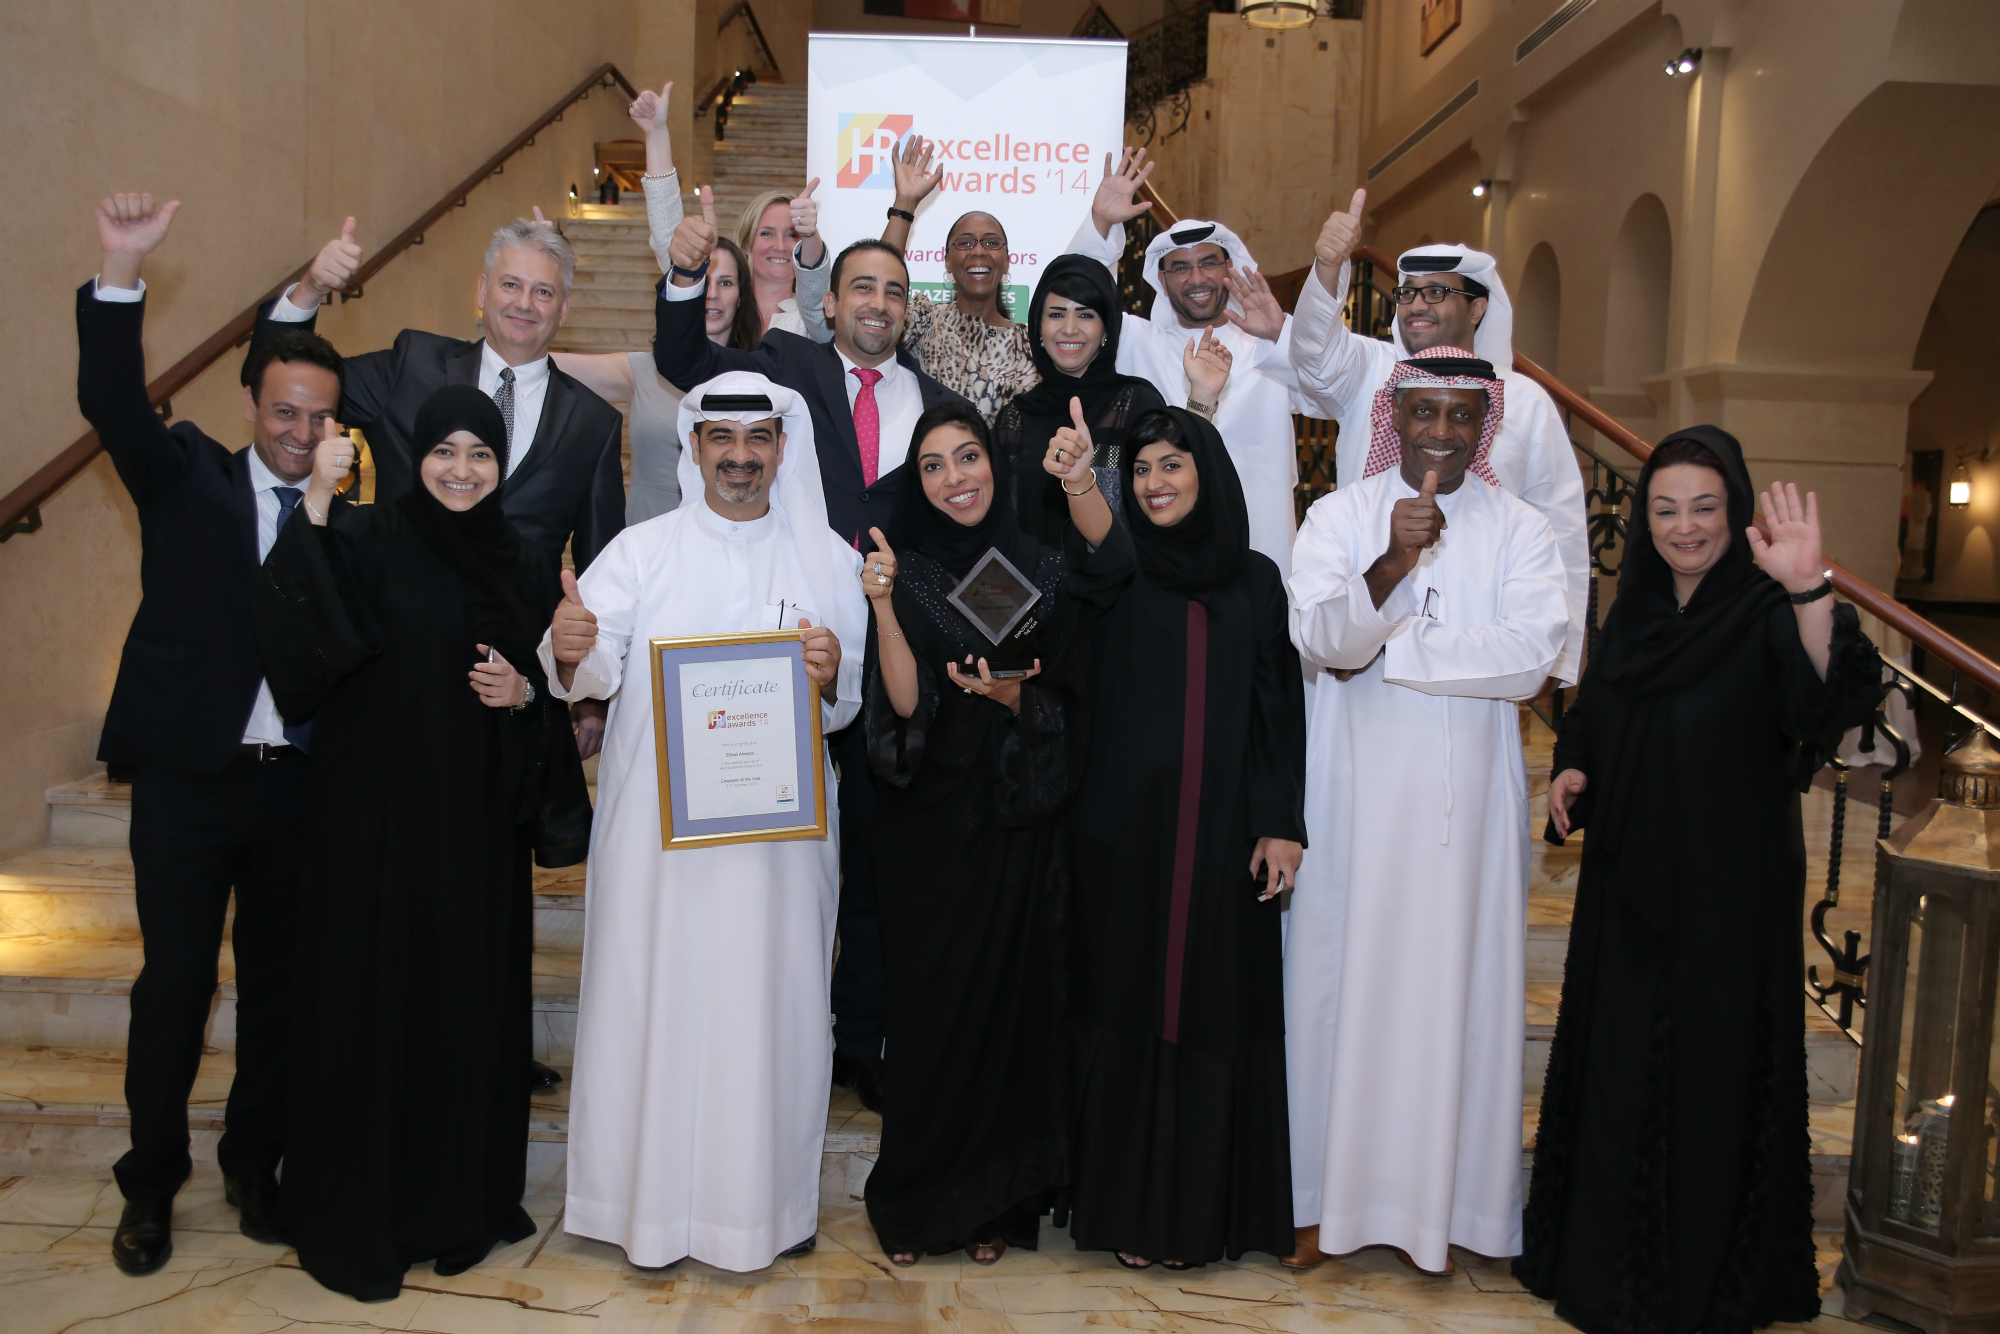 Etihad Airways collected the ‘Employer of the Year’ award at the Middle East HR Excellence Awards 2014 in Dubai last night.